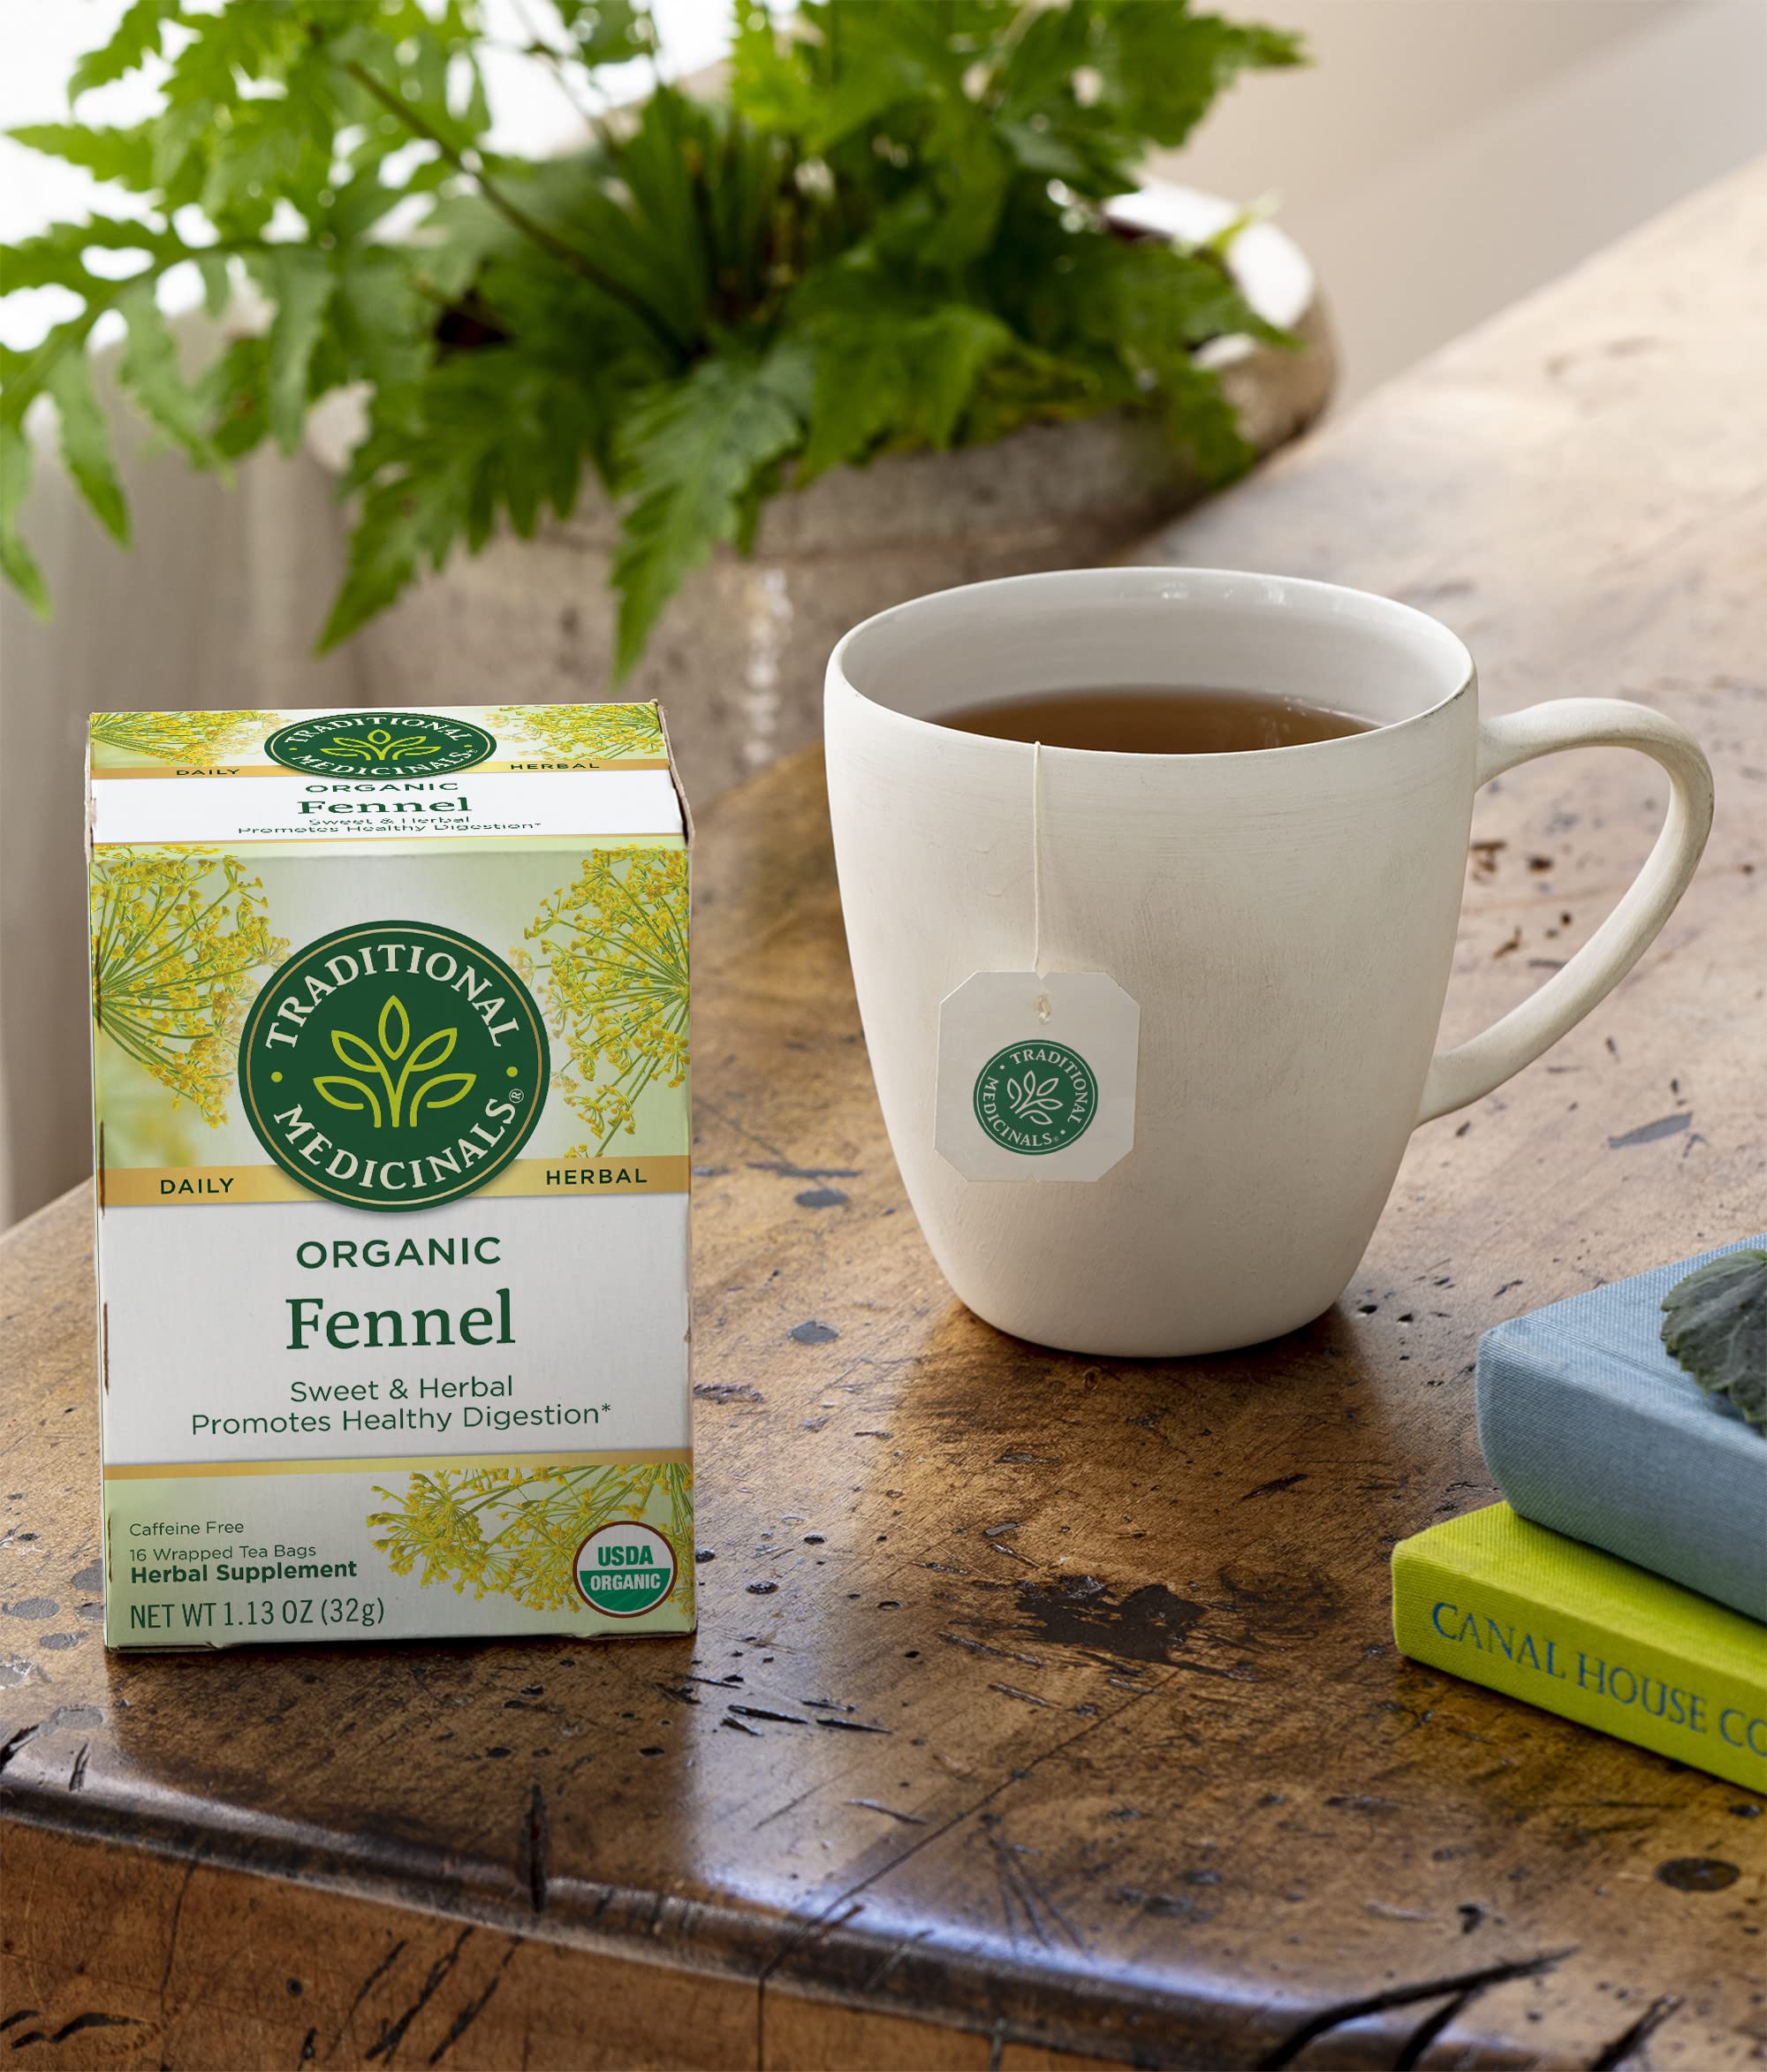 Traditional Medicinals Organic Fennel Herbal Tea, Promotes Digestive Health, (Pack of 2) 32 Tea Bags Total